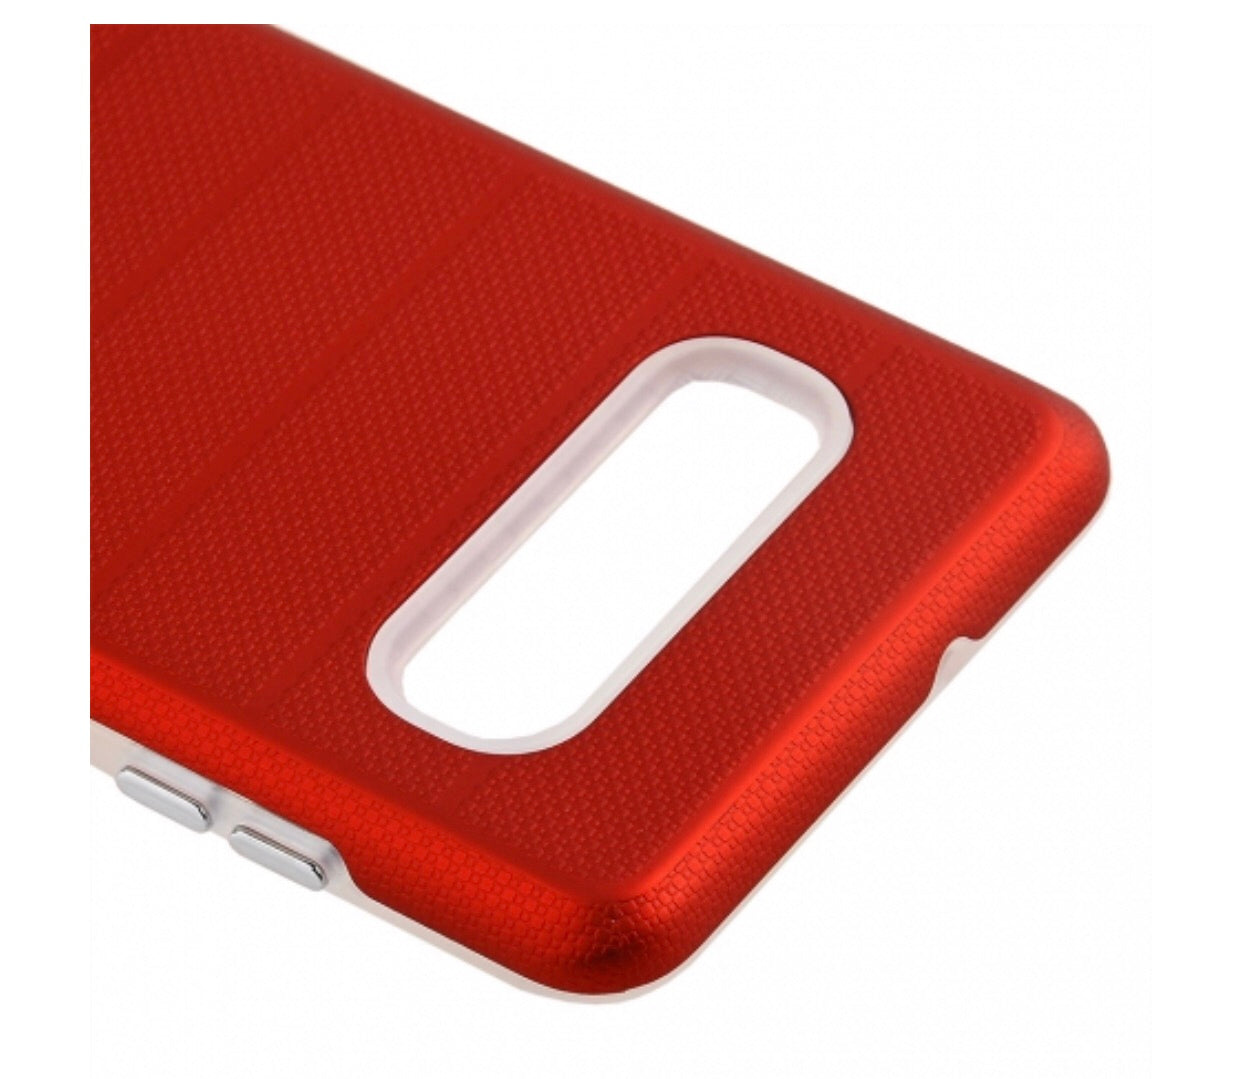 Samsung Galaxy S10 Plus - Hybrid Slim Snap On - Red Color PC textured Back Case